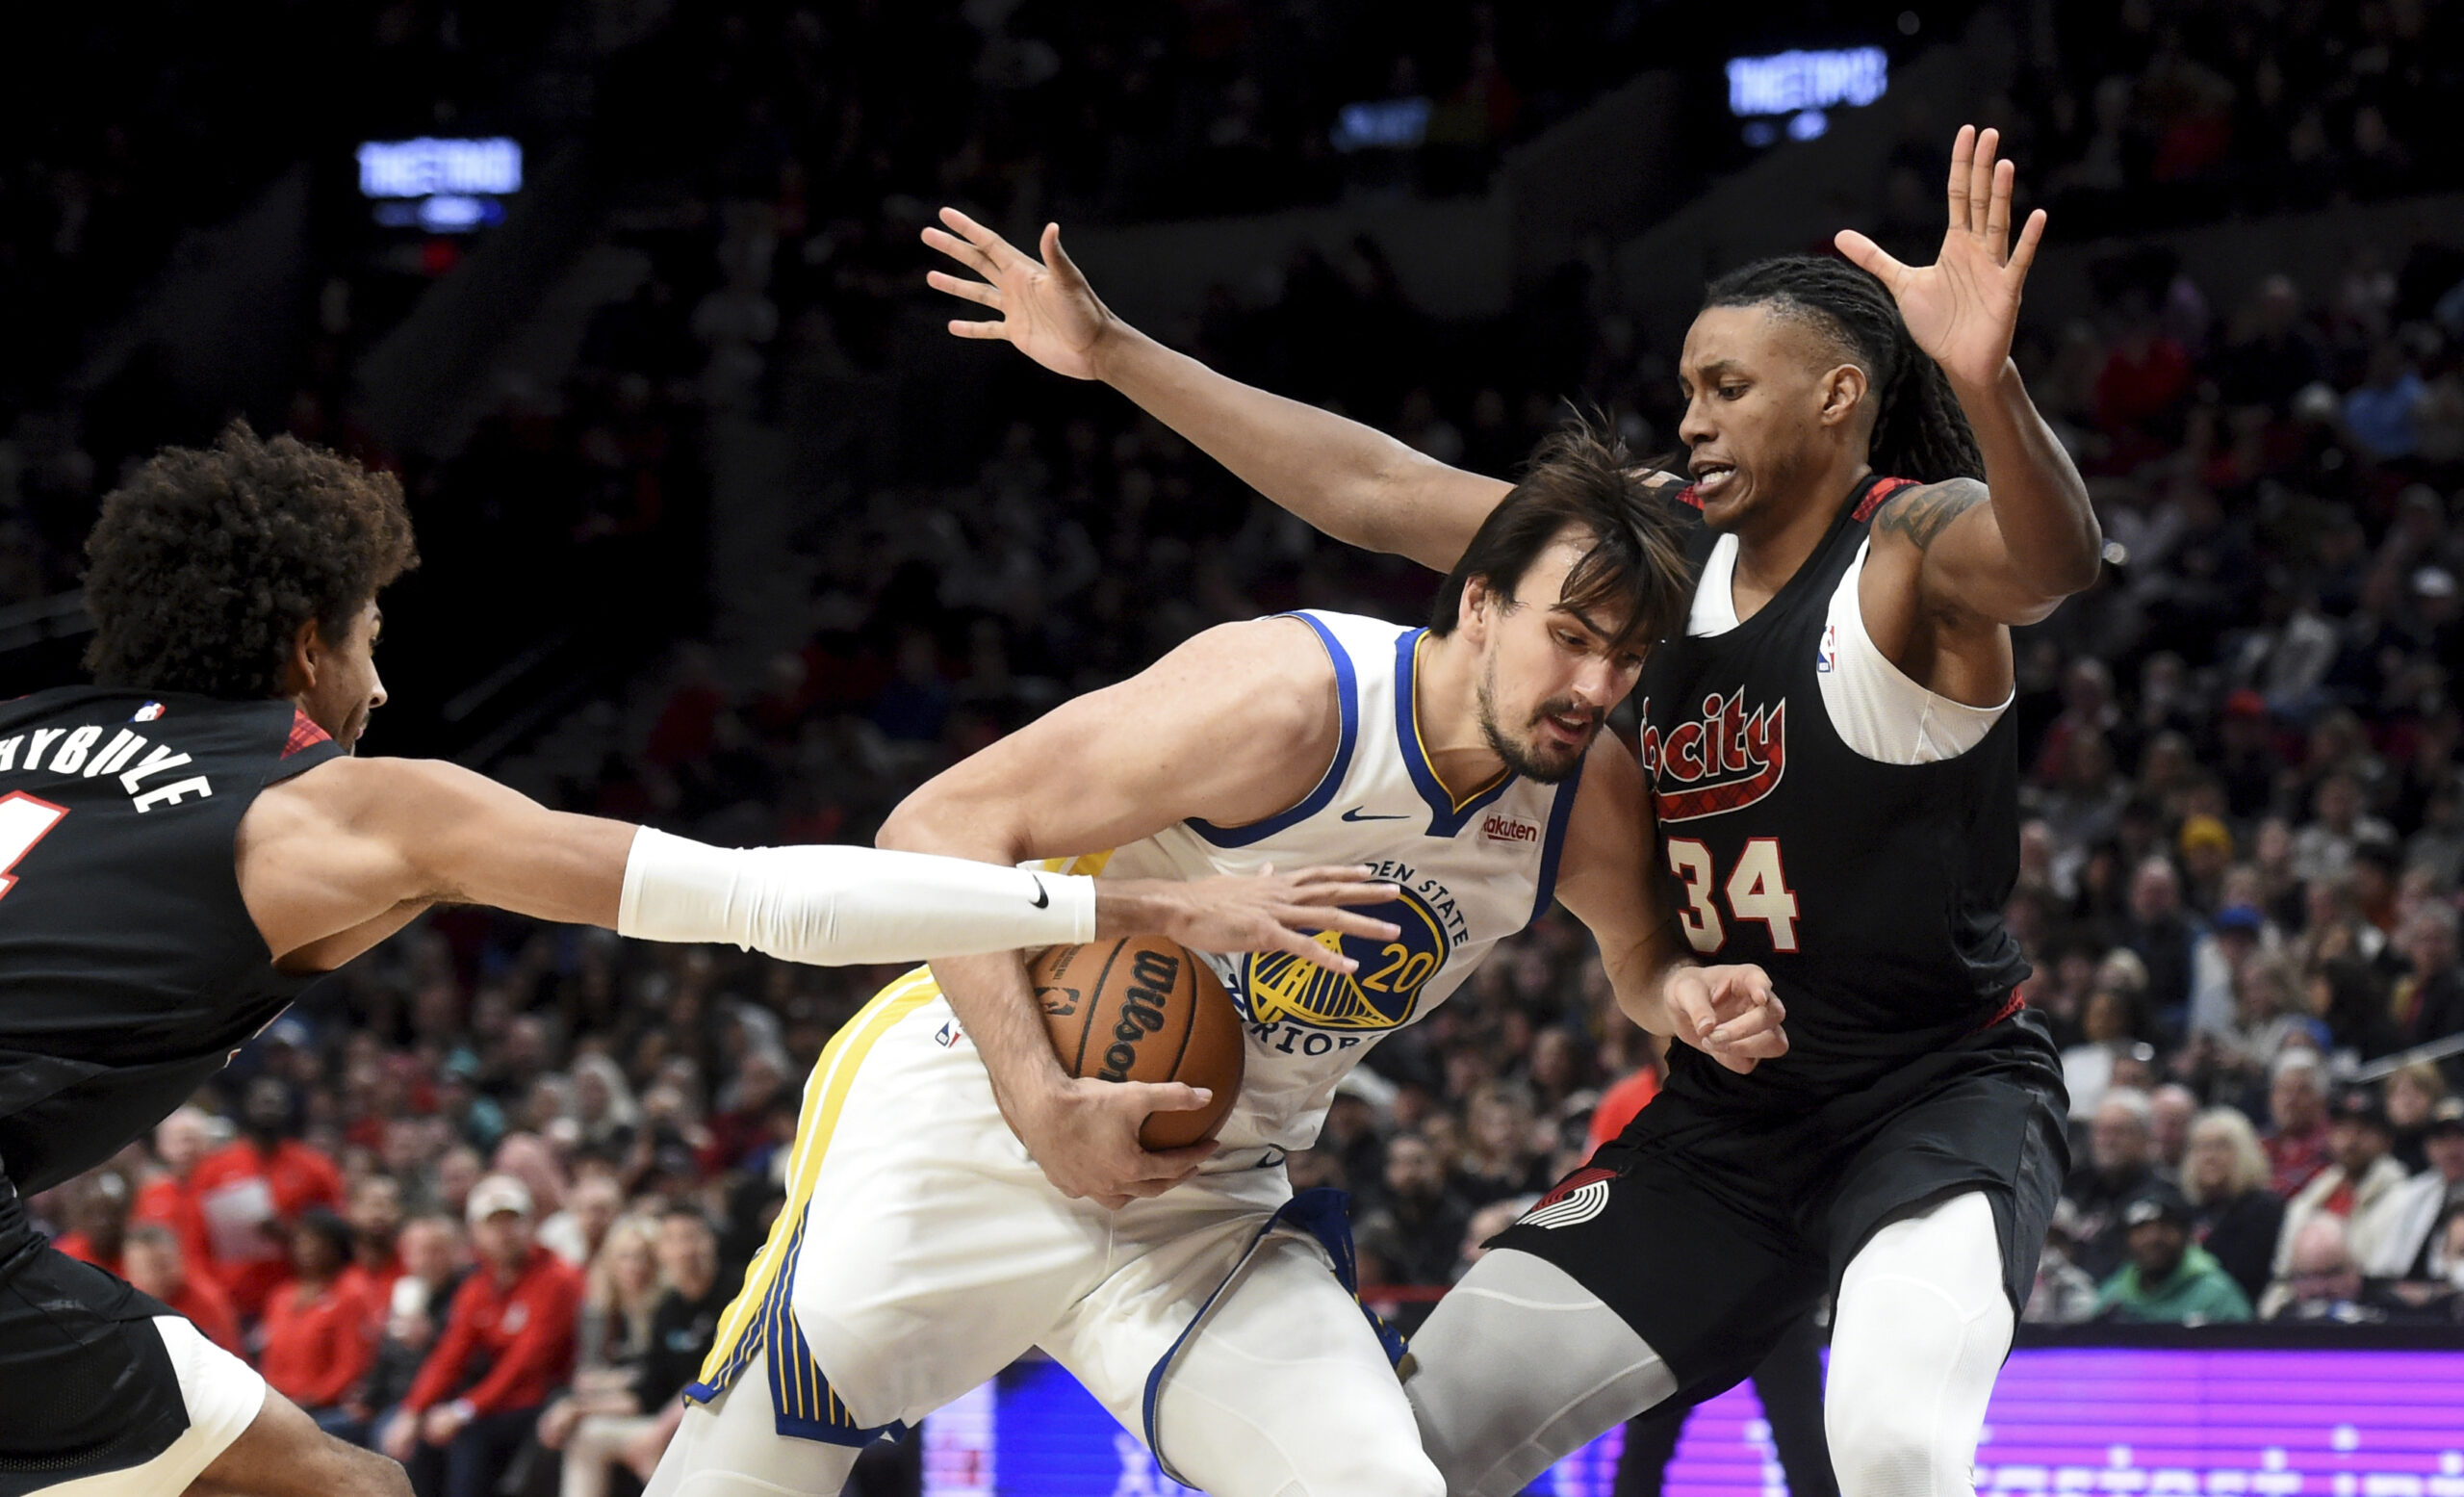 Golden State Warriors forward Dario Saric, center, drives to the basket against Portland Trail Blazers guard Matisse Thybulle, left, and forward Jabari Walker, right, during the second half of an NBA basketball game in Portland, Ore., Sunday, Dec. 17, 2023. The Warriors won 118-114. (AP Photo/Steve Dykes)